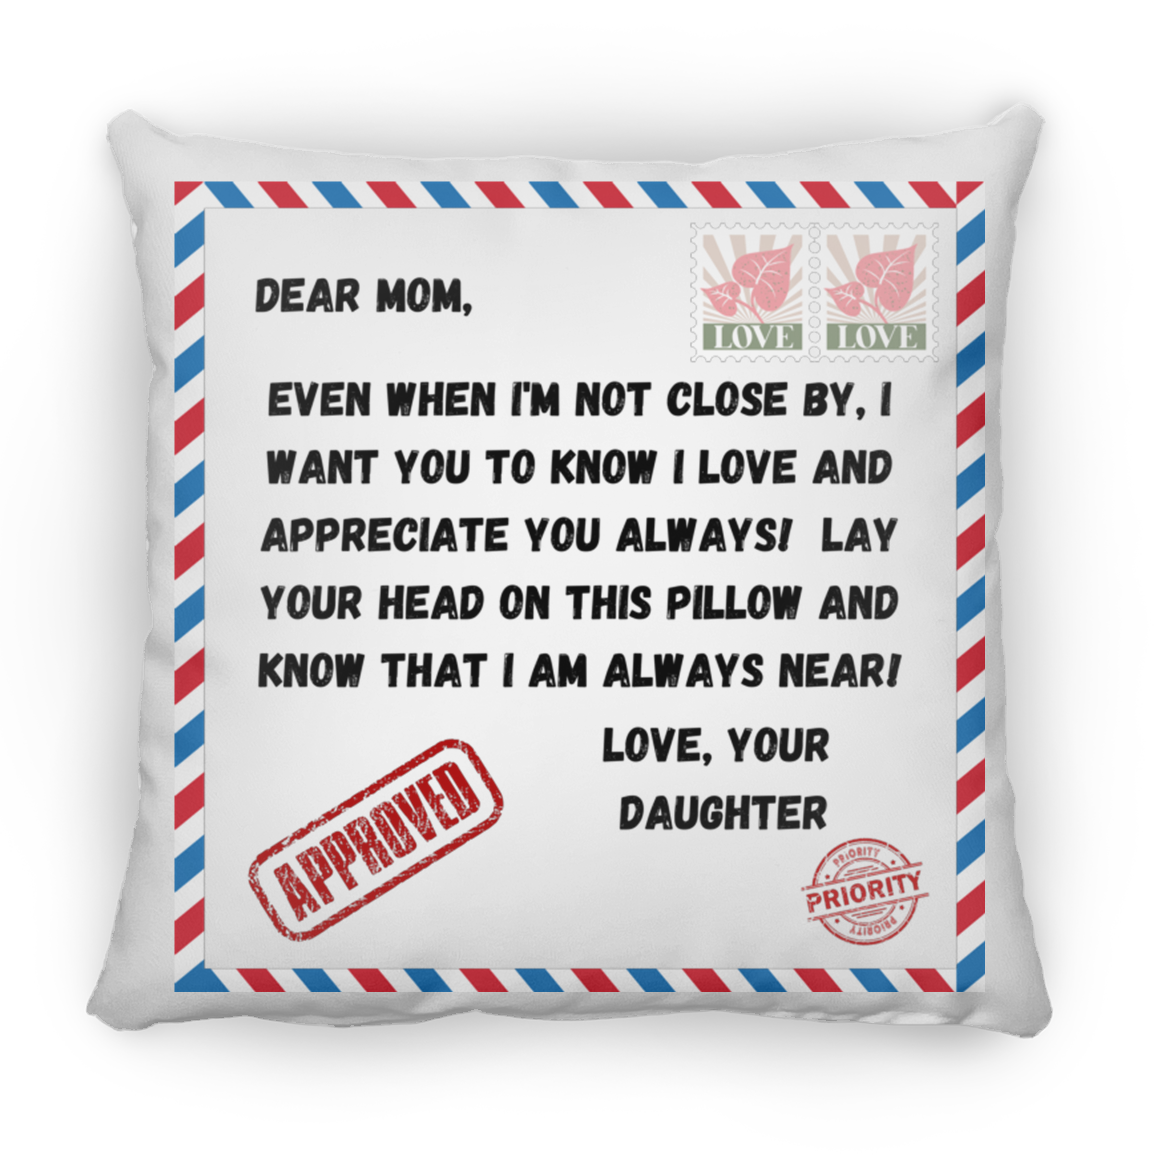 Love Your Daughter Square Pillow